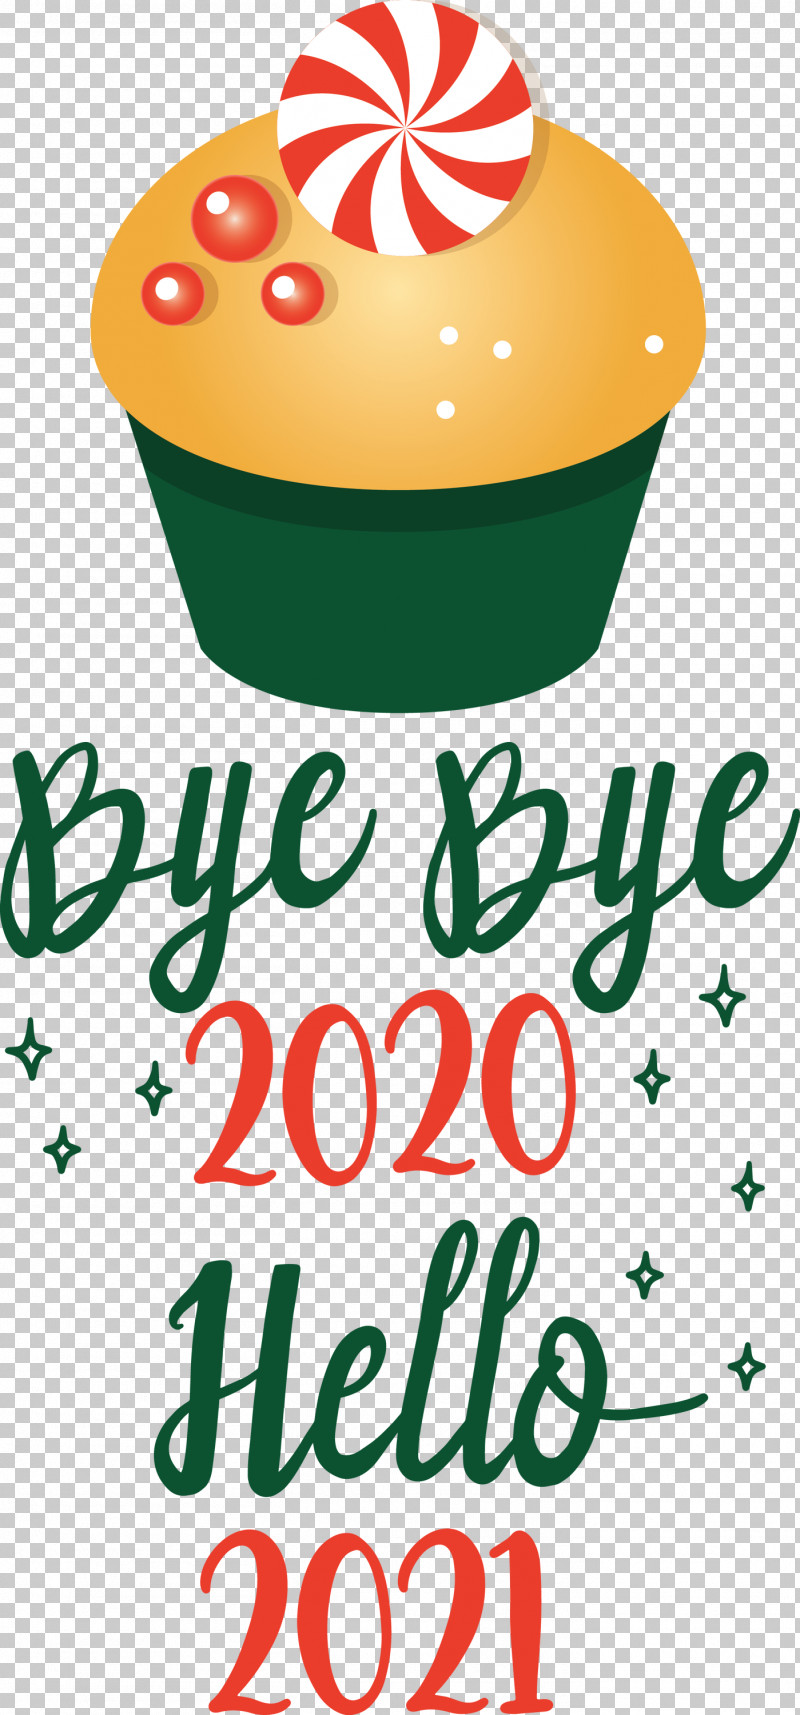 Hello 2021 Year Bye Bye 2020 Year PNG, Clipart, Bye Bye 2020 Year, Hello 2021 Year, Logo, M, Meter Free PNG Download